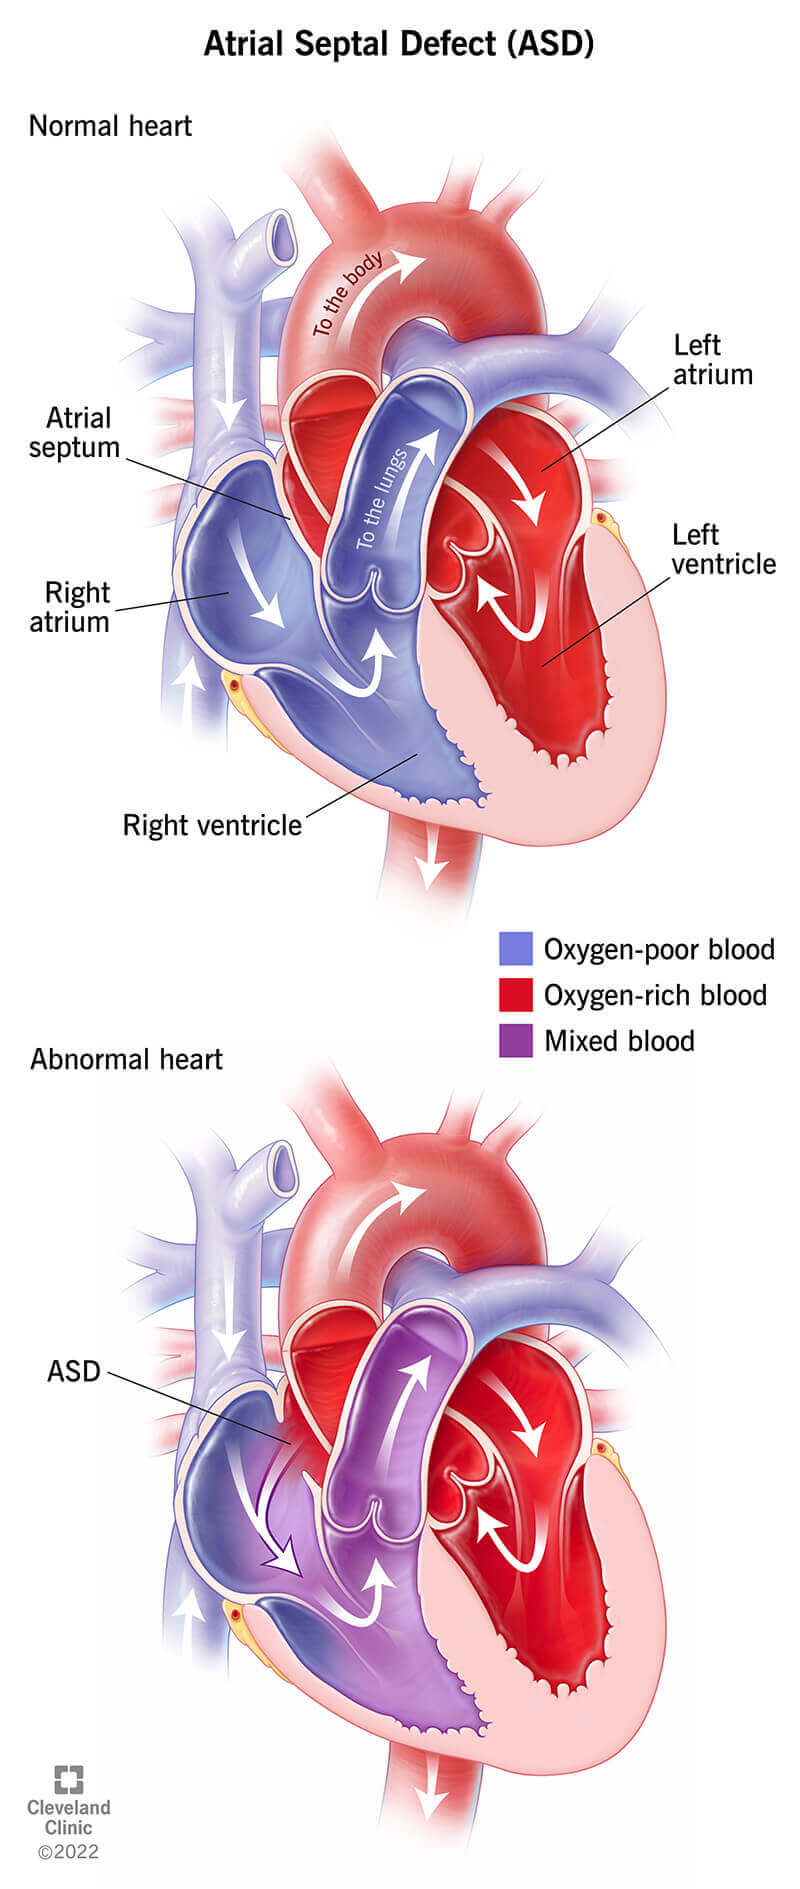 Illustration comparing a normal heart with a heart that has an atrial septal defect.